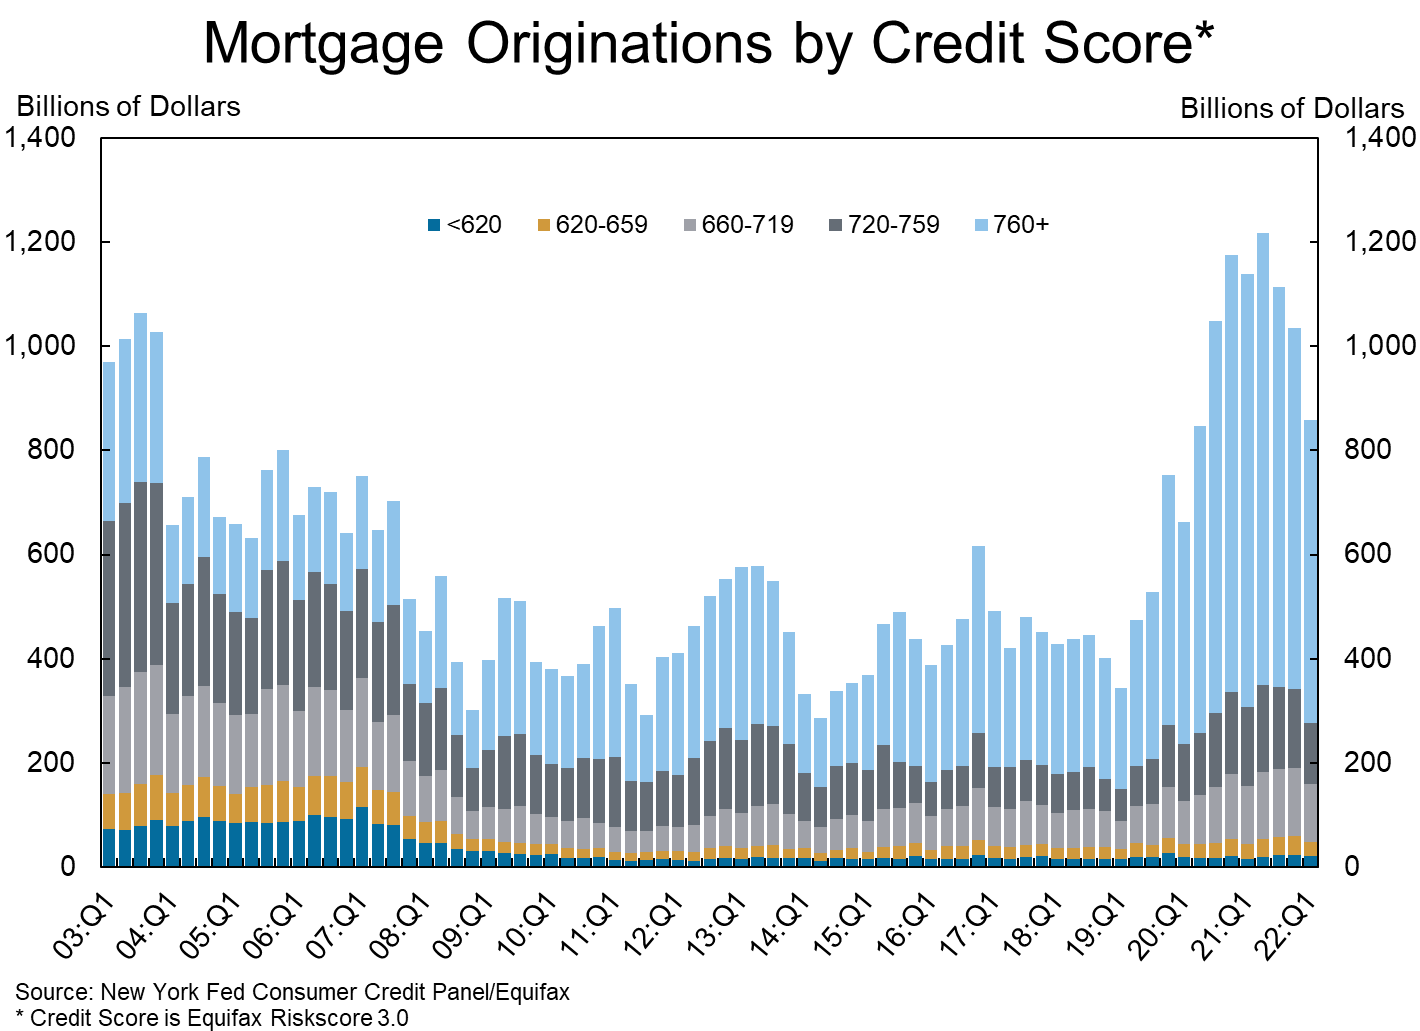 Mortgage originations by credit score since 2003